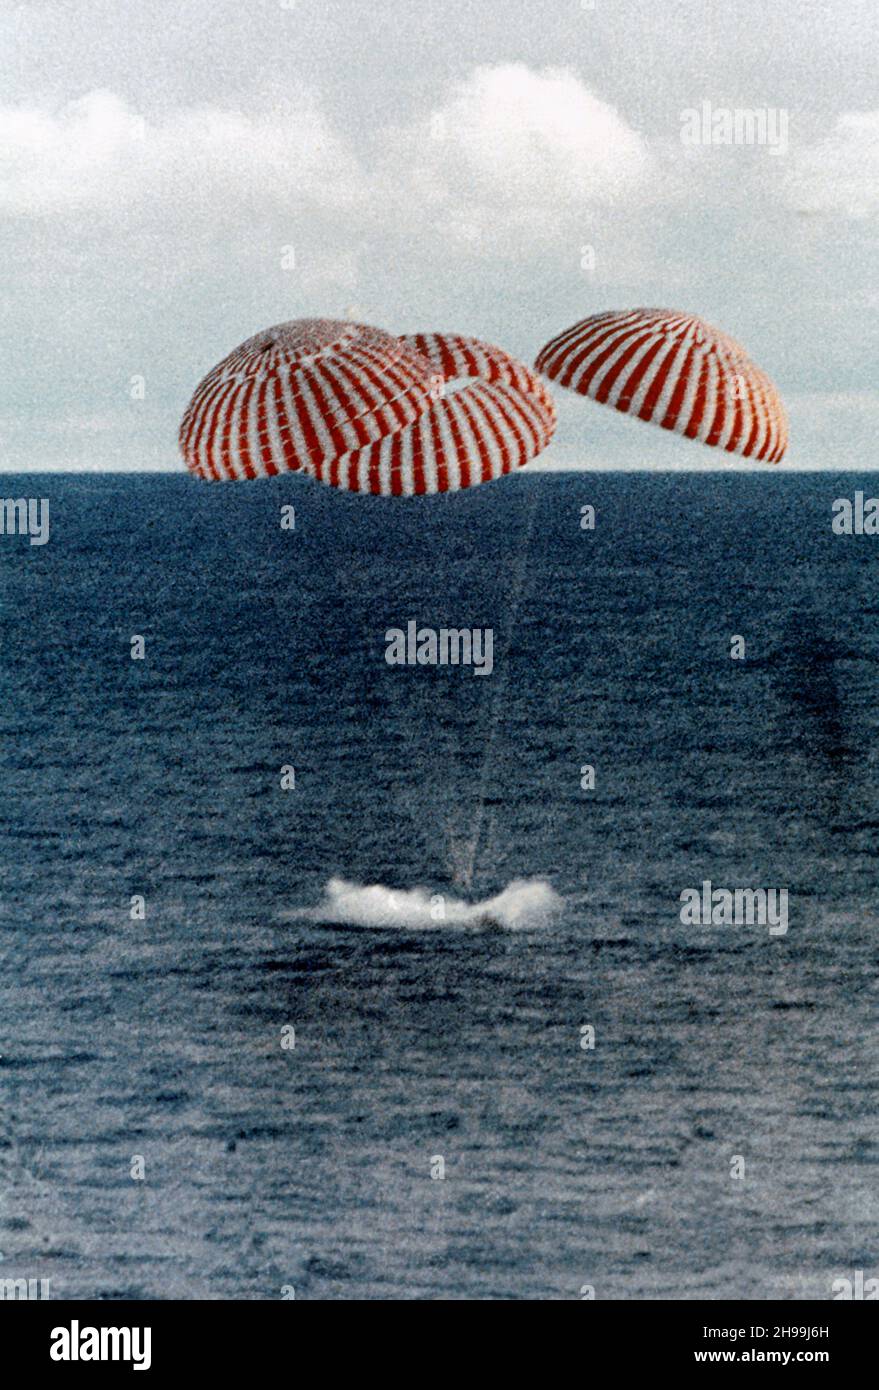 Safe splashdown of the Apollo 13 Command Module (CM) in the South Pacific, only four miles from the prime recovery ship. The spacecraft with astronauts James A. Lovell Jr., John L. Swigert Jr., and Fred W. Haise Jr. aboard, splashed down at 12:07:44 p.m. (CST) April 17, 1970, to conclude safely the problem-plagued flight. The crewmen were transported by helicopter from the immediate recovery area to the USS Iwo Jima, prime recovery vessel. Stock Photo